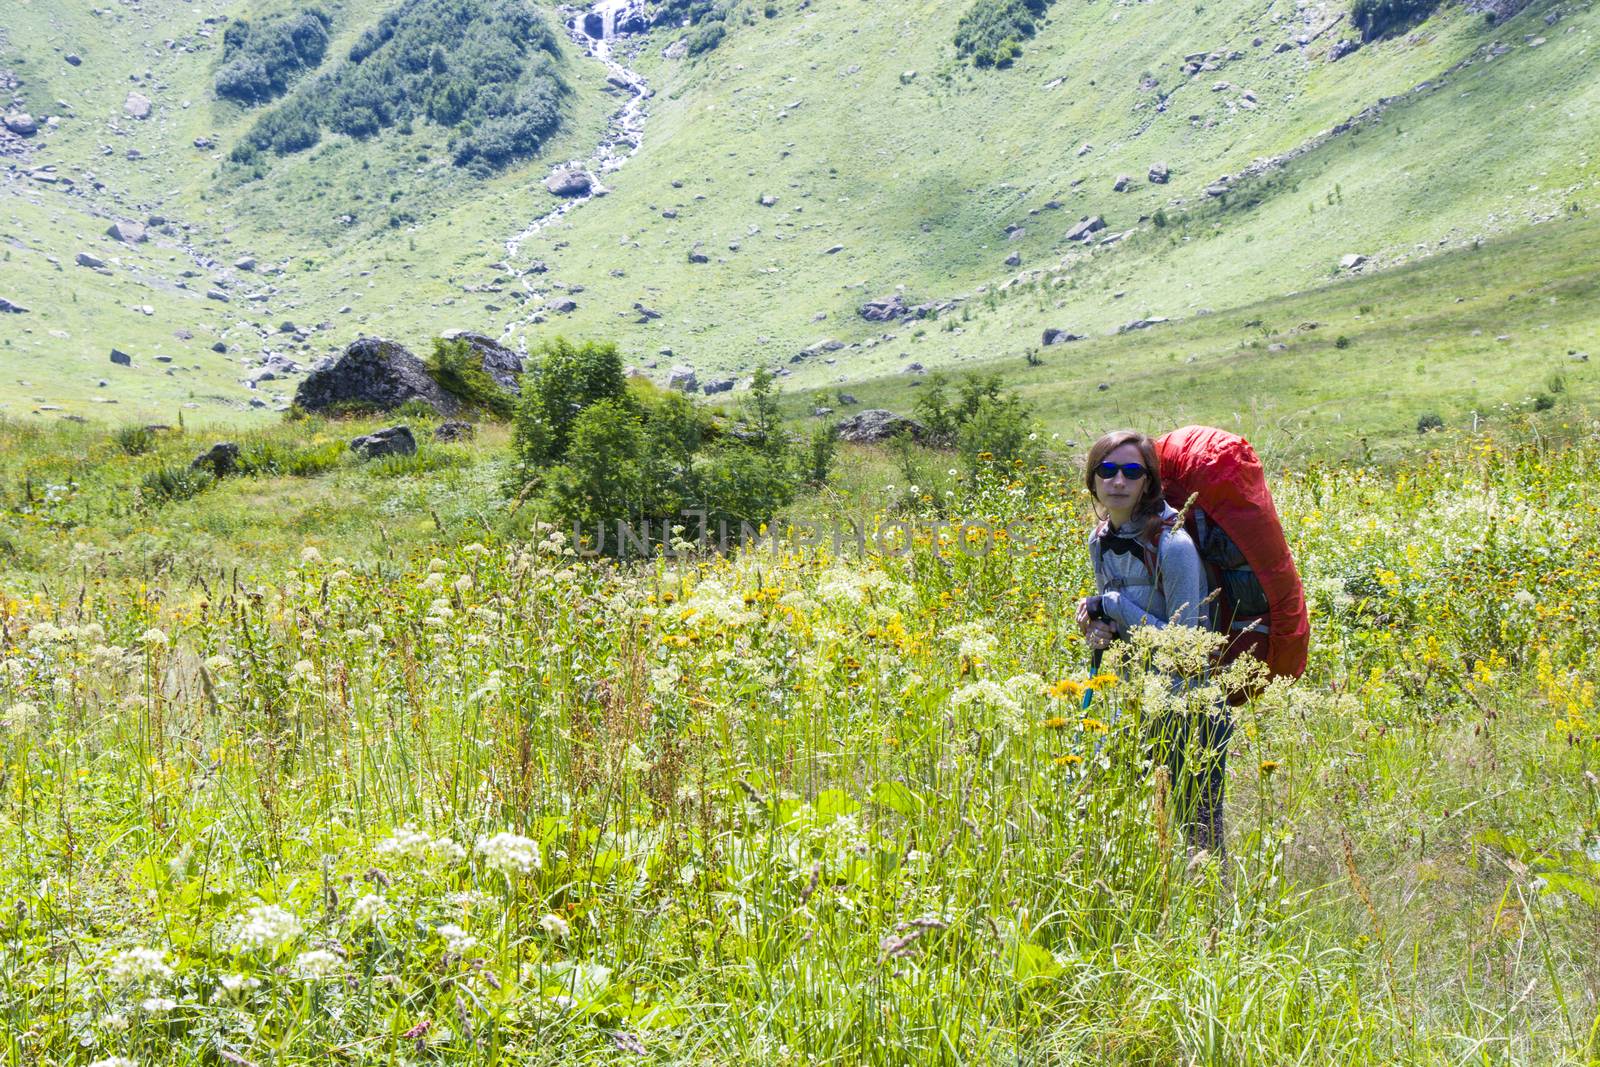 Hiker and backpacker in the mountain valley and field, trekking and hiking scene in Svaneti, Georgia, young and adult woman.